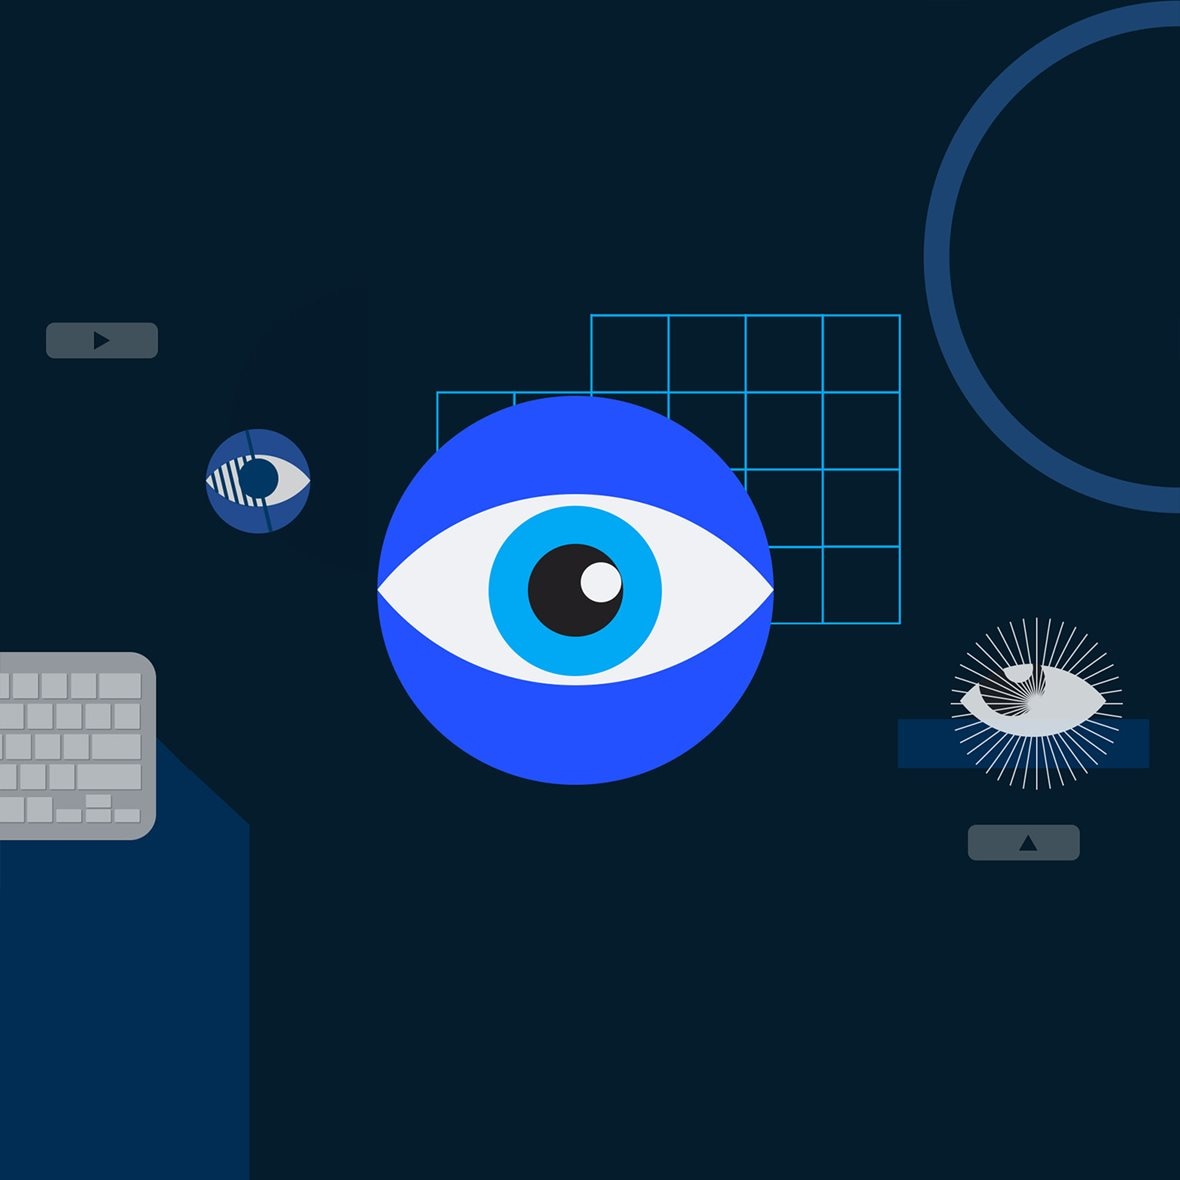 Abstract digital illustration featuring a large blinking eye in the center with geometric shapes, a keyboard and two smaller interpretive drawings of eyes around it